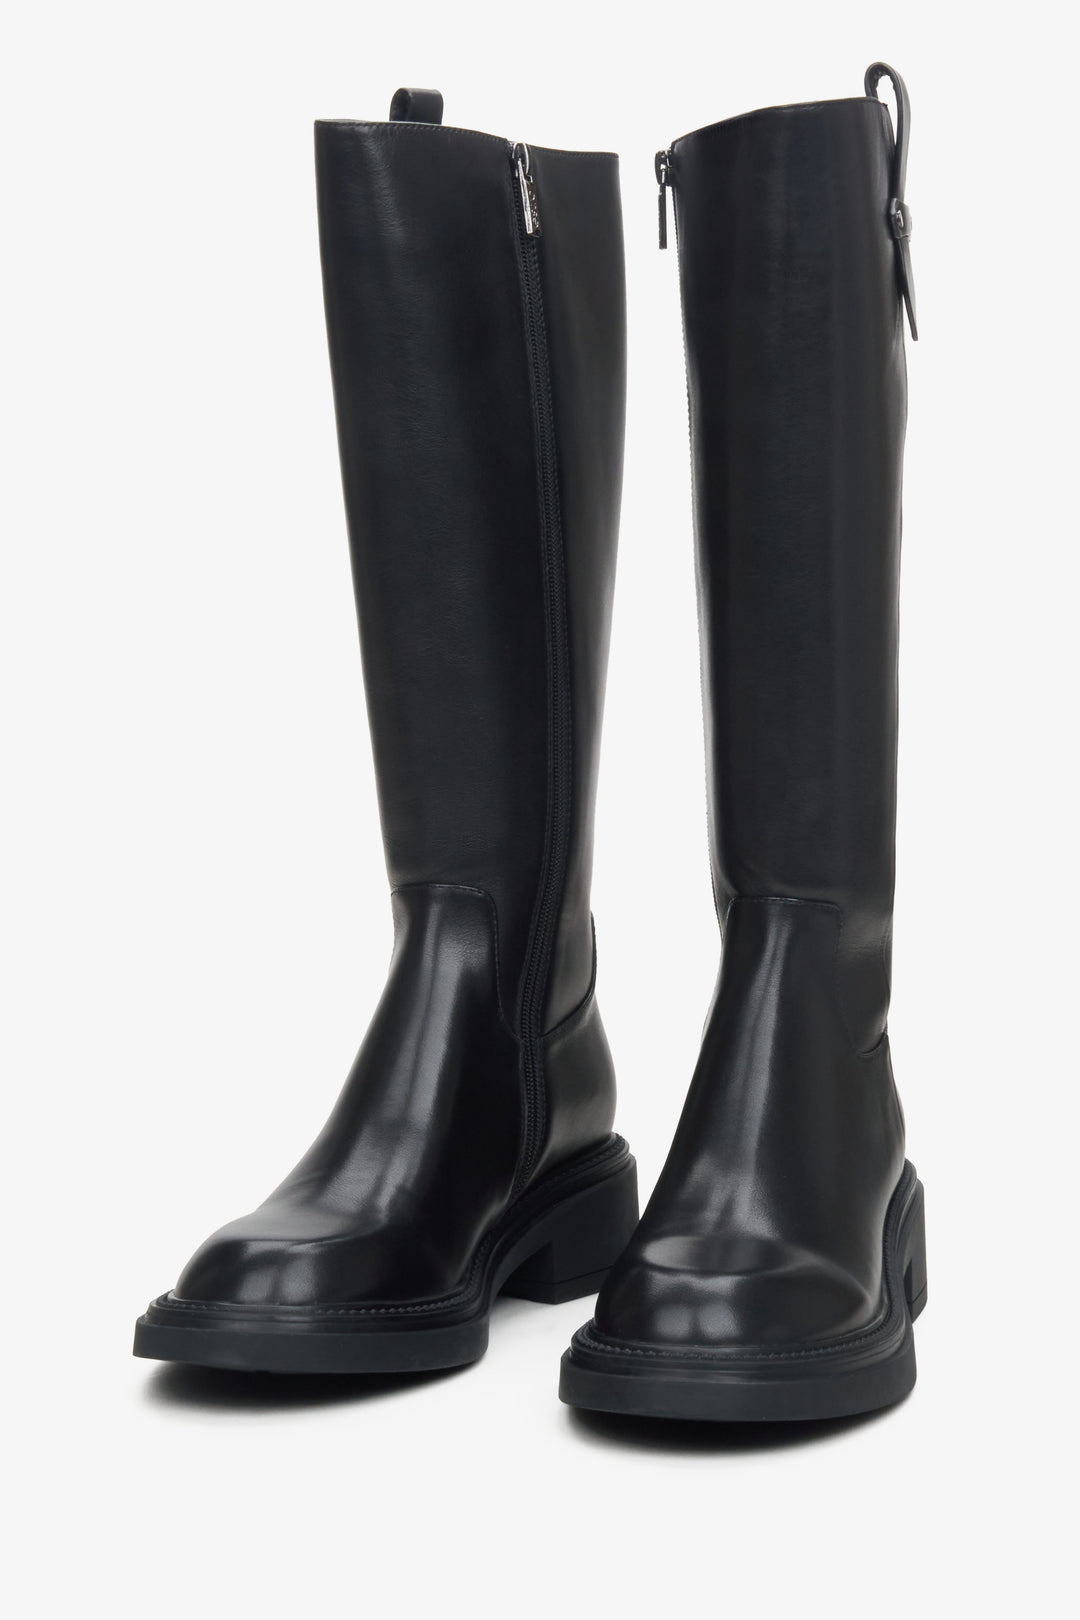 Women's boots made of genuine leather with a wide shaft by Estro - front presentation.